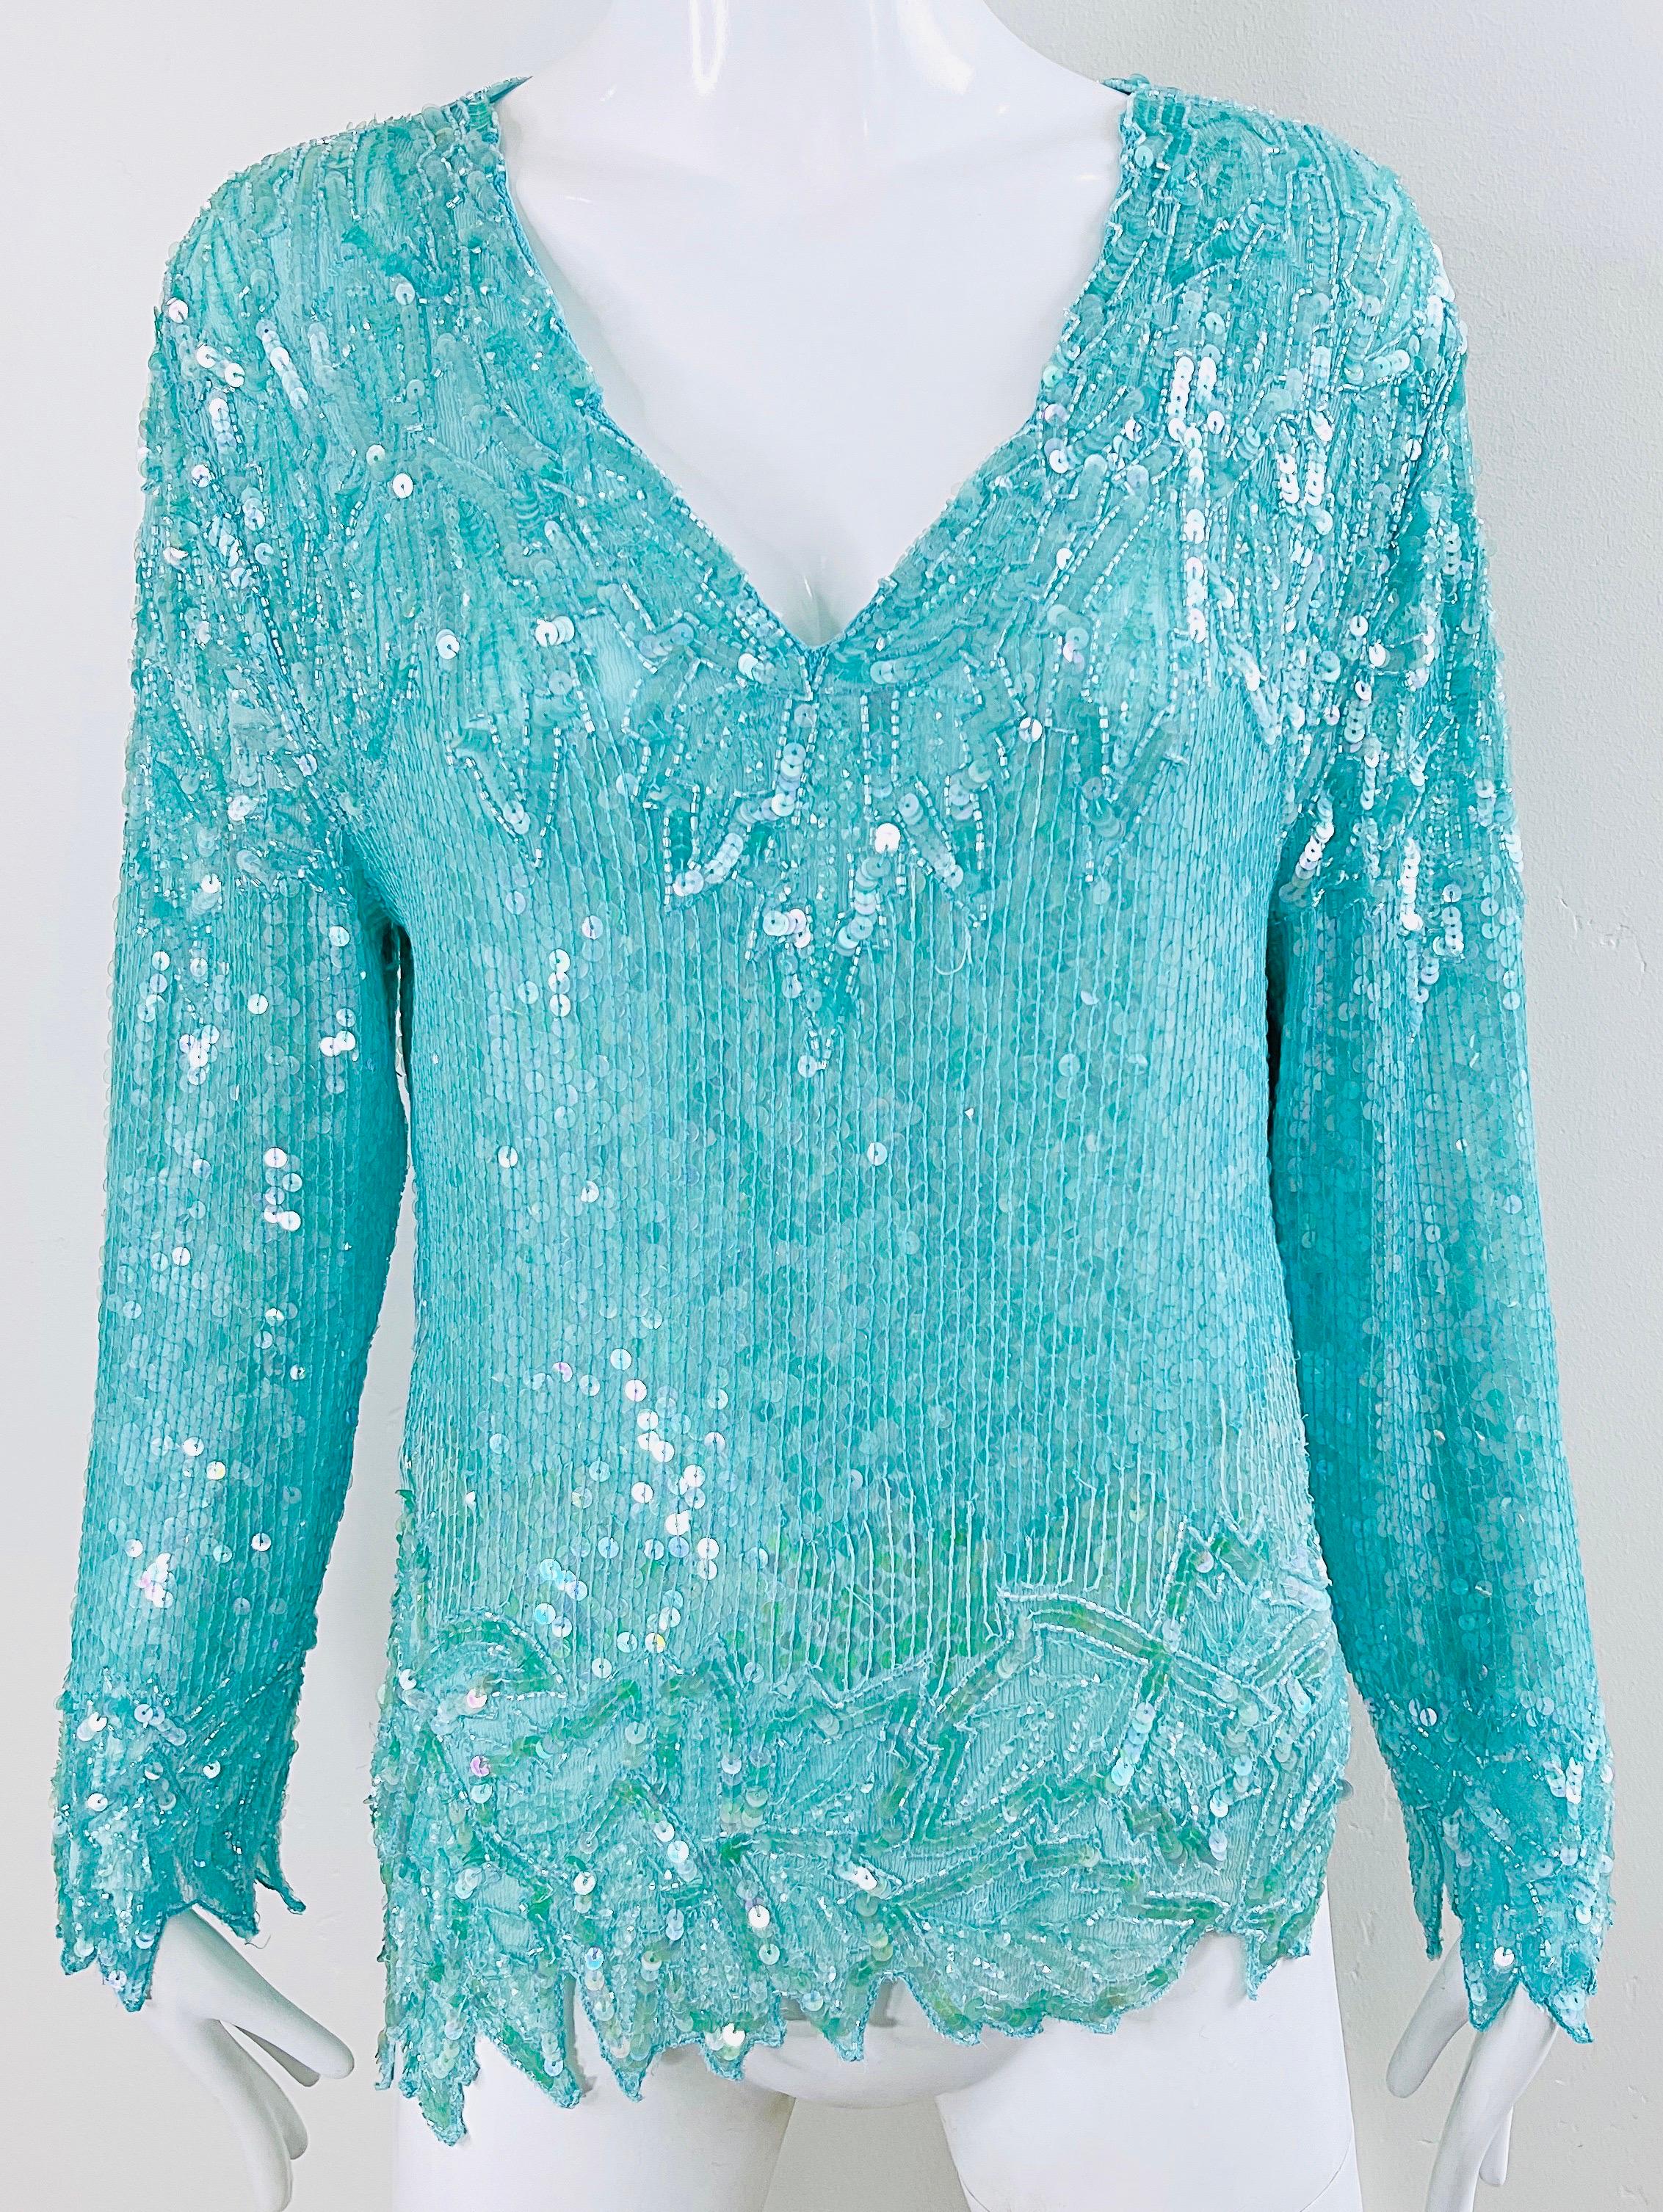 1980s Swee Lo Turquoise Blue Sequin Beaded Silk Chiffon Vintage 80s Blouse For Sale 5